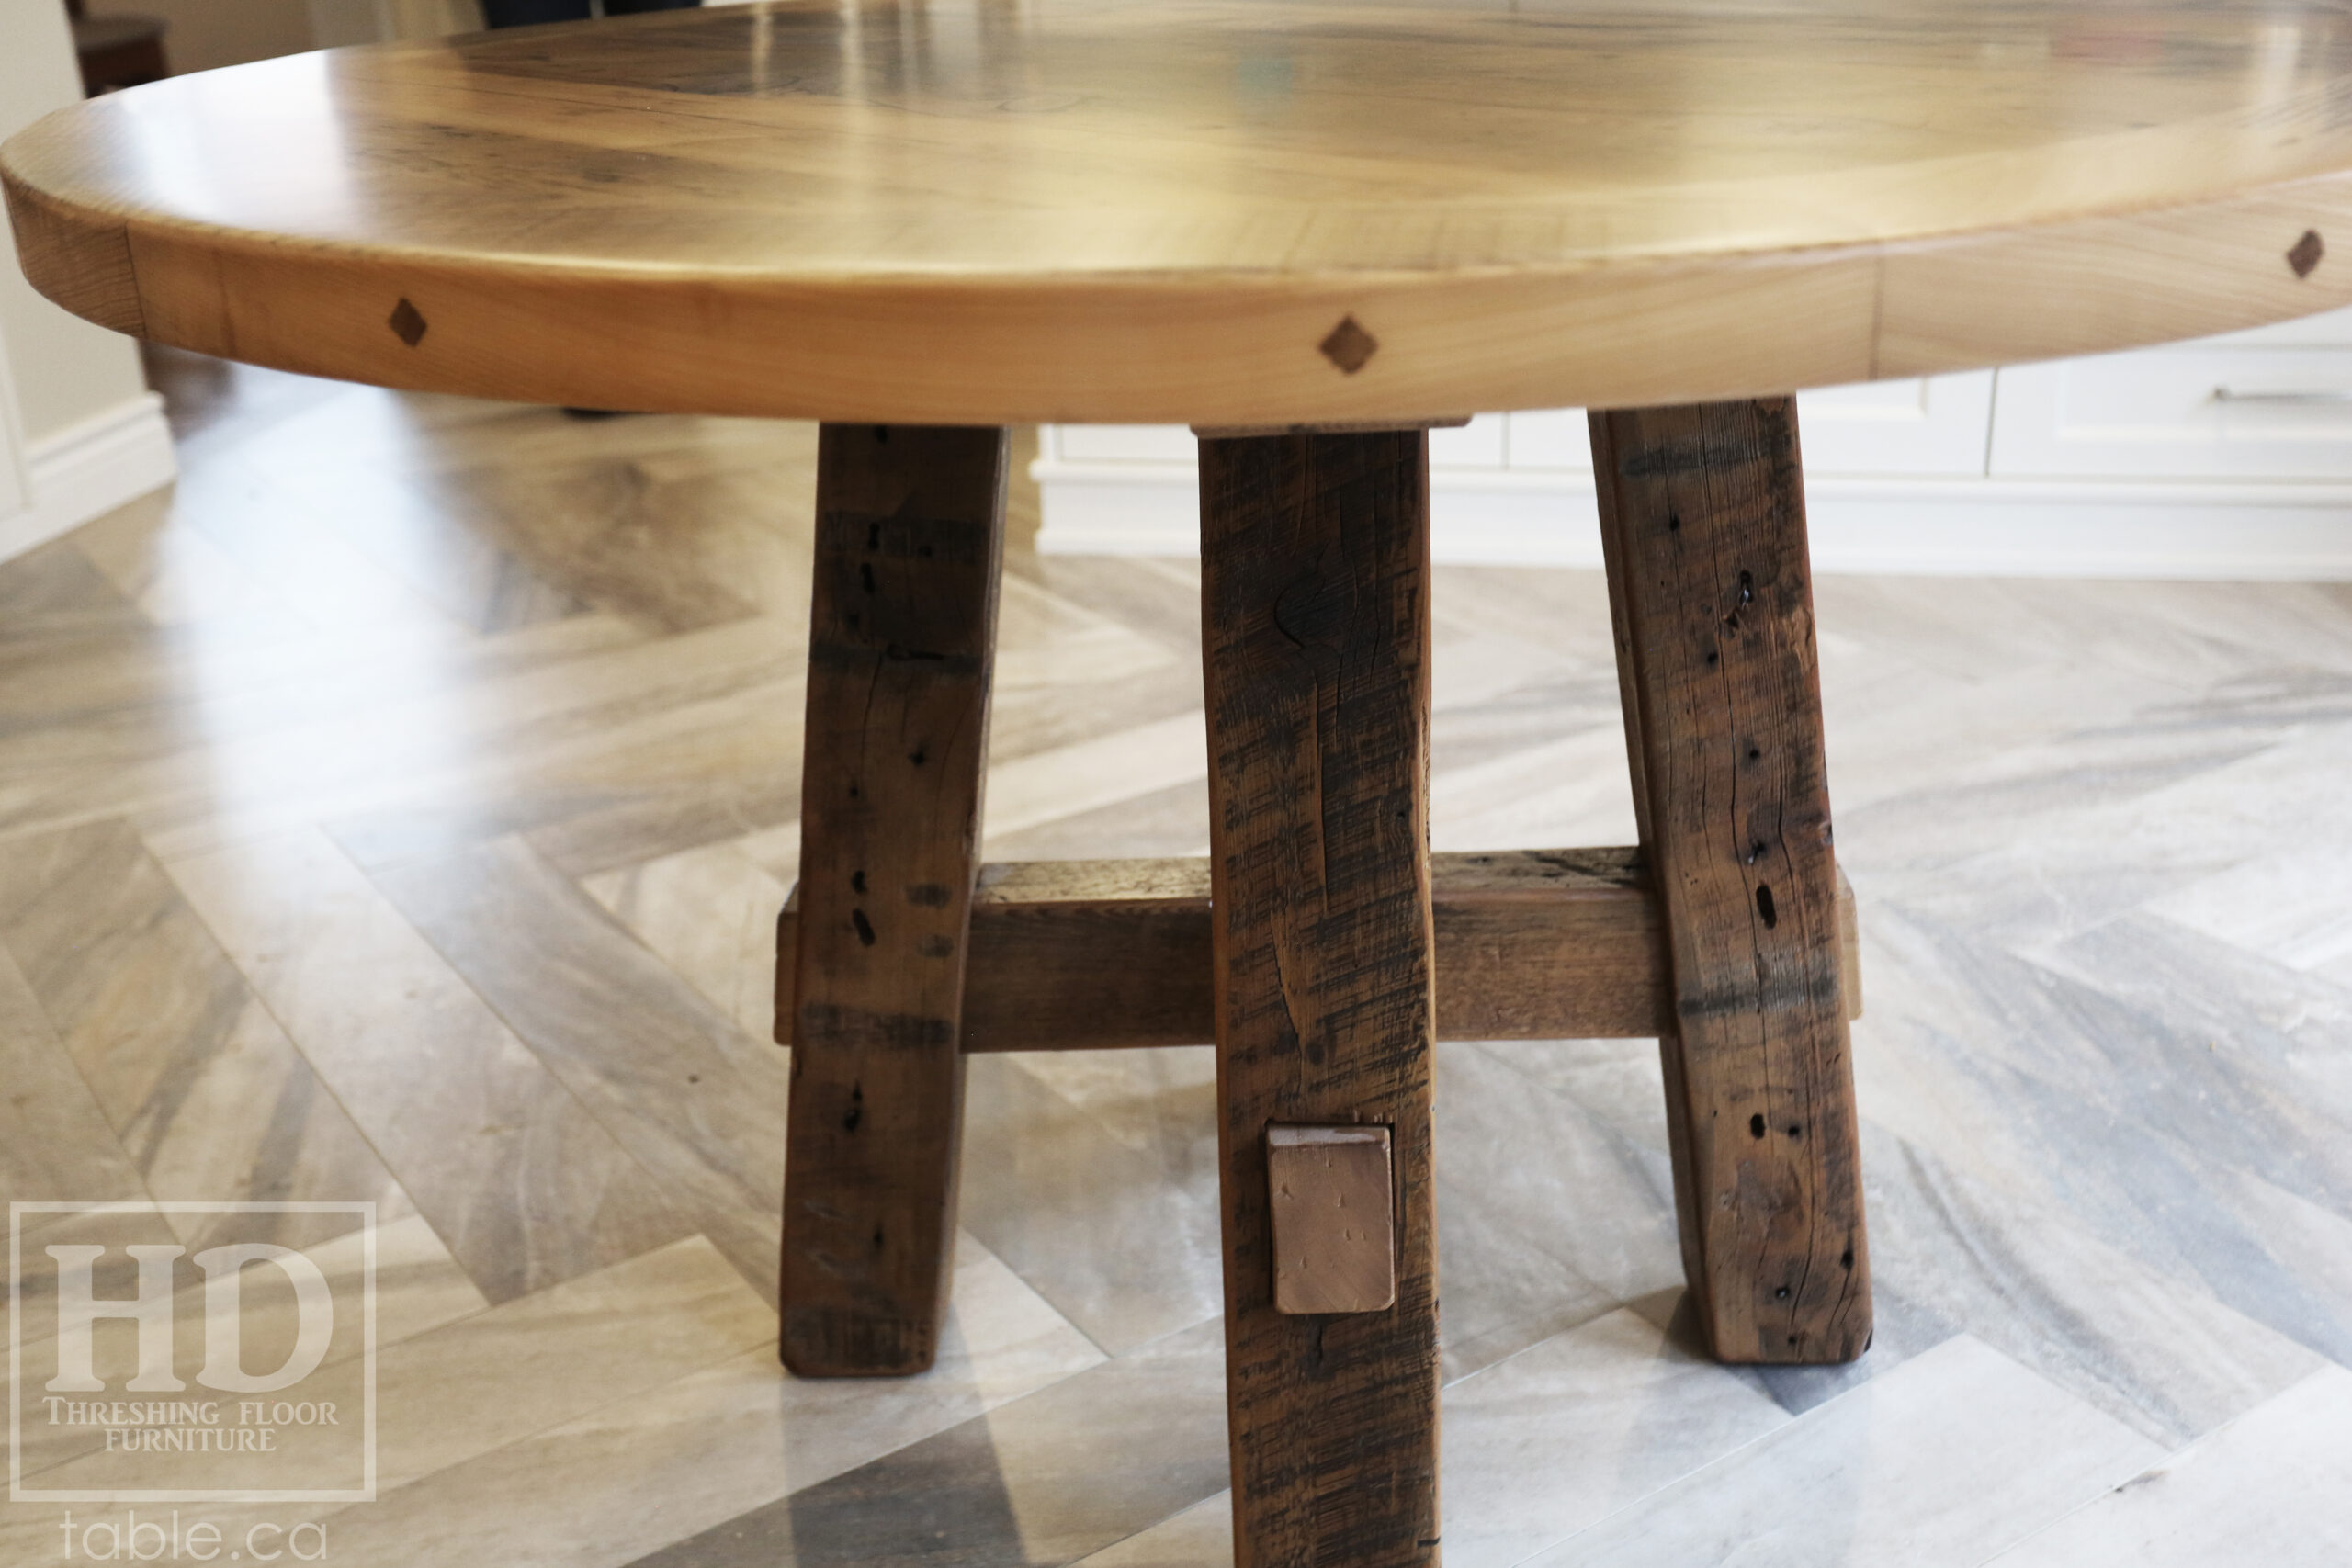 48” Reclaimed Ontario Barnwood Round Table we made for an Ancaster, Ontario home – Frame Base - Old Growth Hemlock Threshing Floor Construction - Original edges & distressing maintained – Bread Edge Ends – Premium epoxy + matte polyurethane finish – Greytone Option - www.table.ca